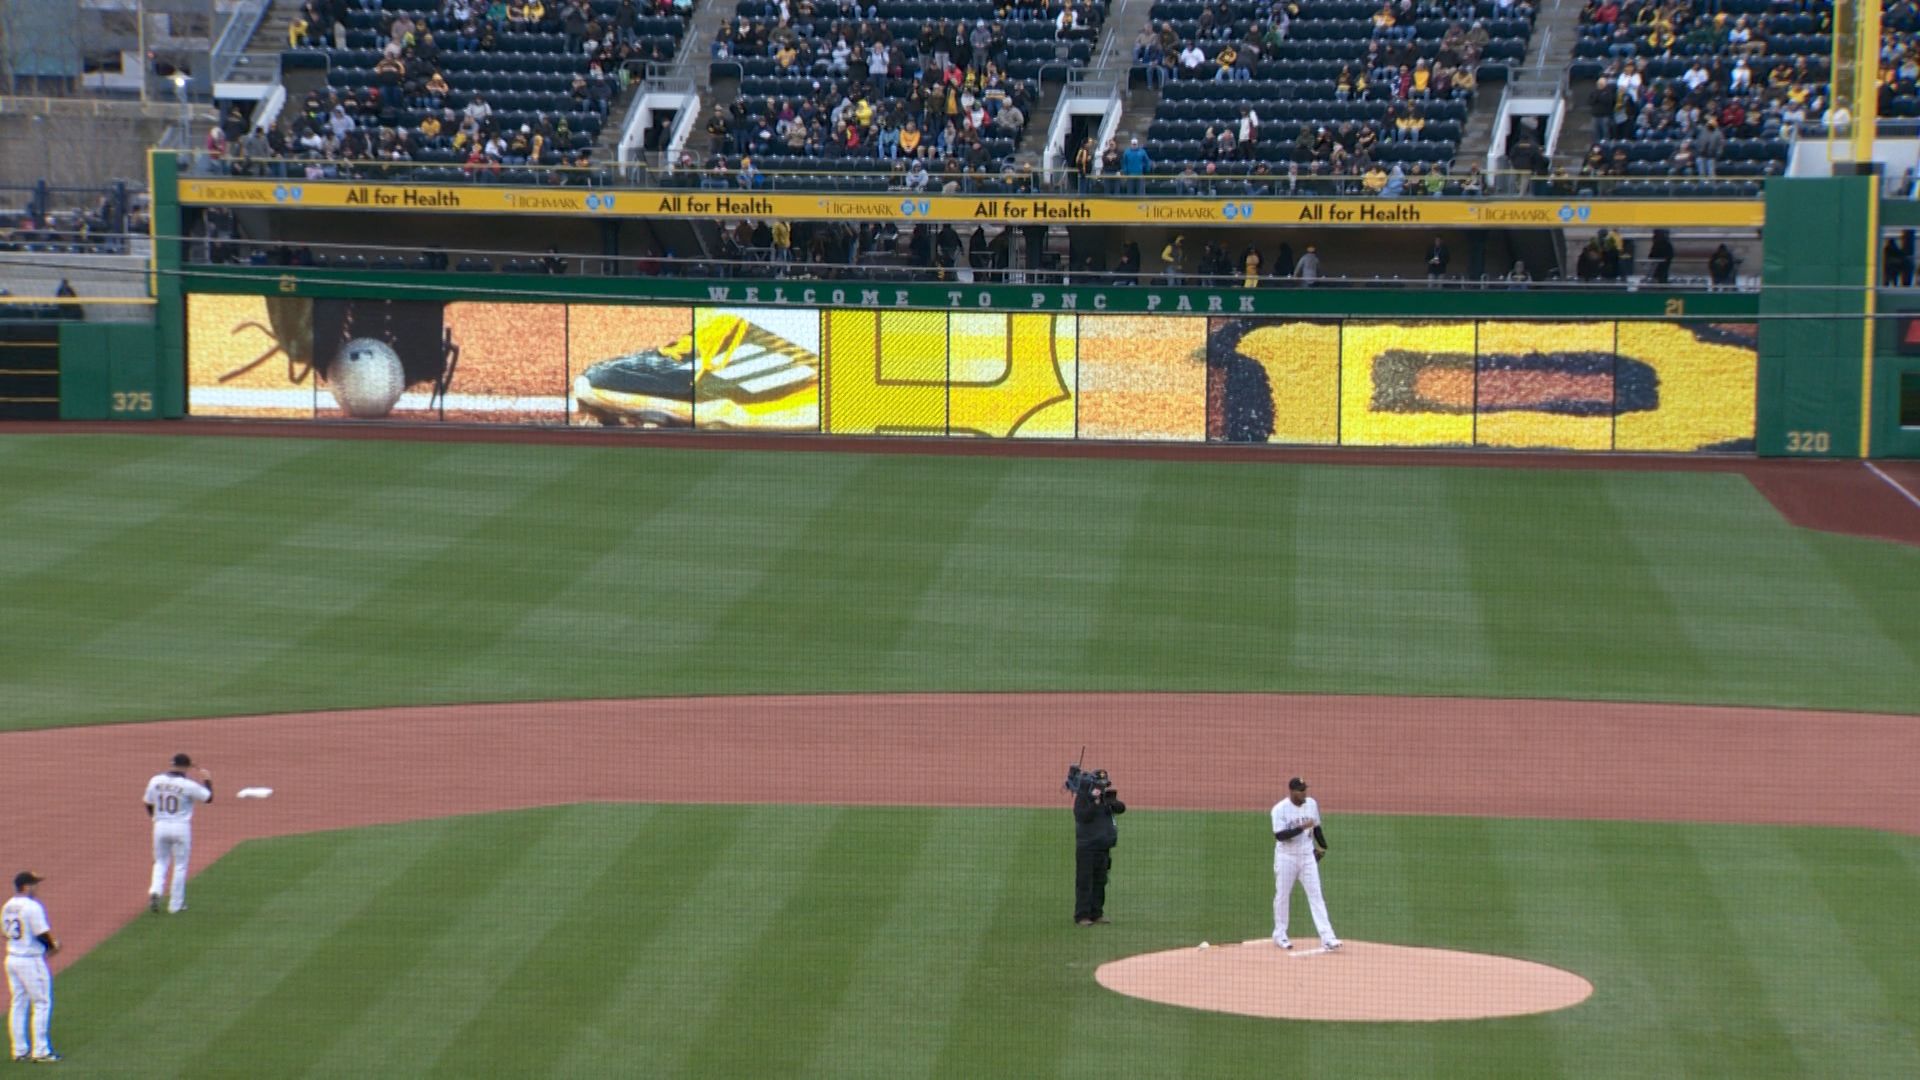 Pirates to bring back out-of-town scoreboard at PNC Park in 2023